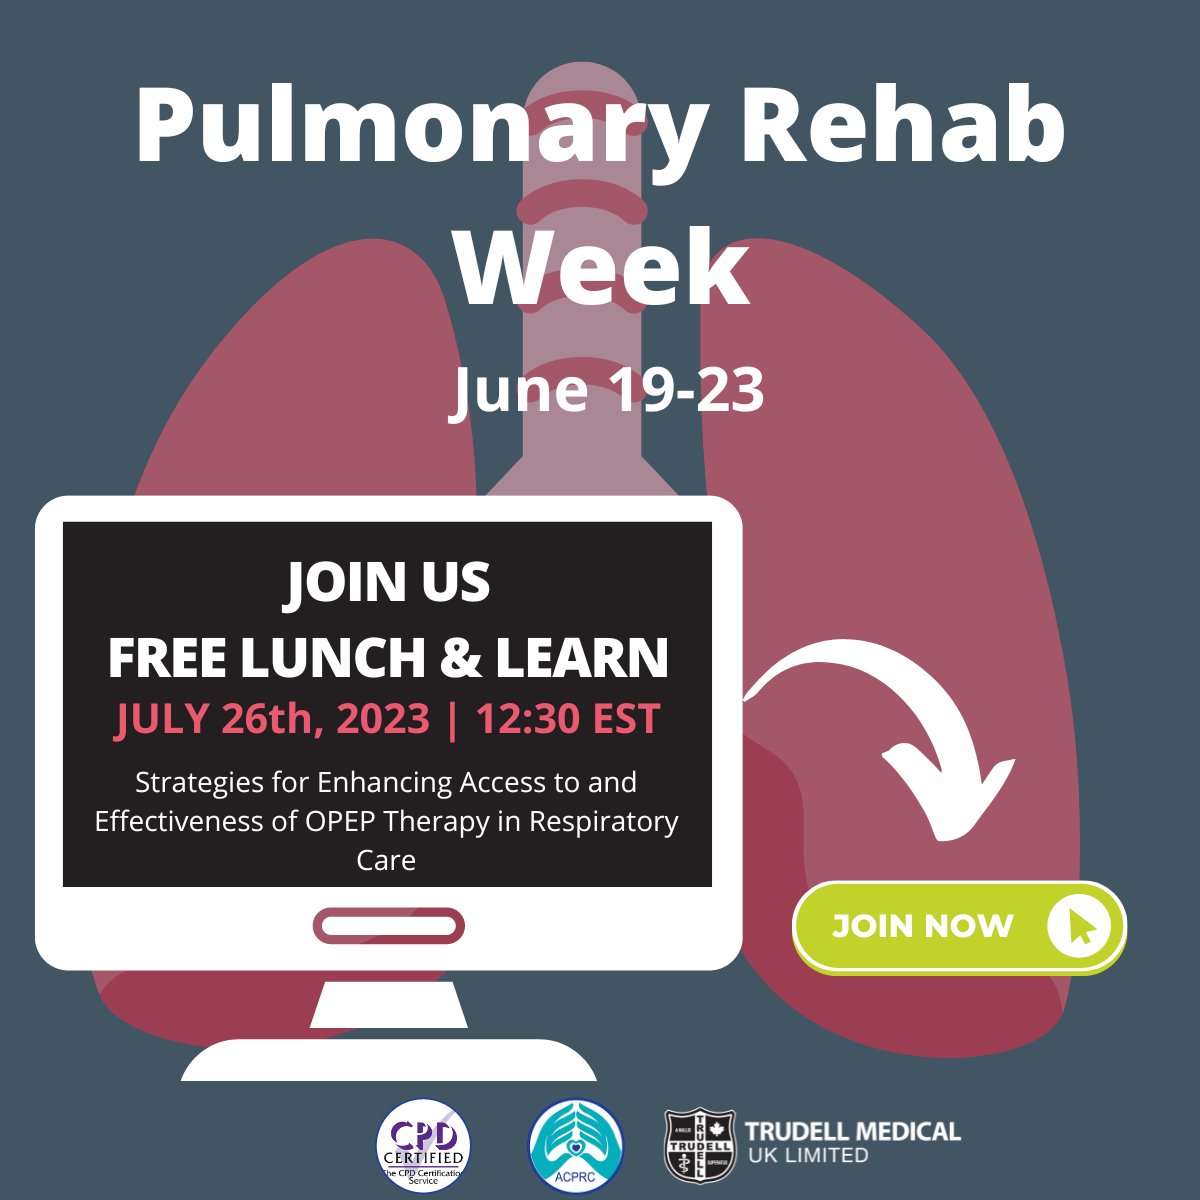 In honor of Pulmonary Rehab week in the UK, we are hosting a FREE webinar to discuss the effectiveness of OPEP therapy in Respiratory Care. Join us on July 26th to learn more! #pulmonaryrehabweek #loveyourlungs #respisbest Sign Up Now! us06web.zoom.us/webinar/regist…